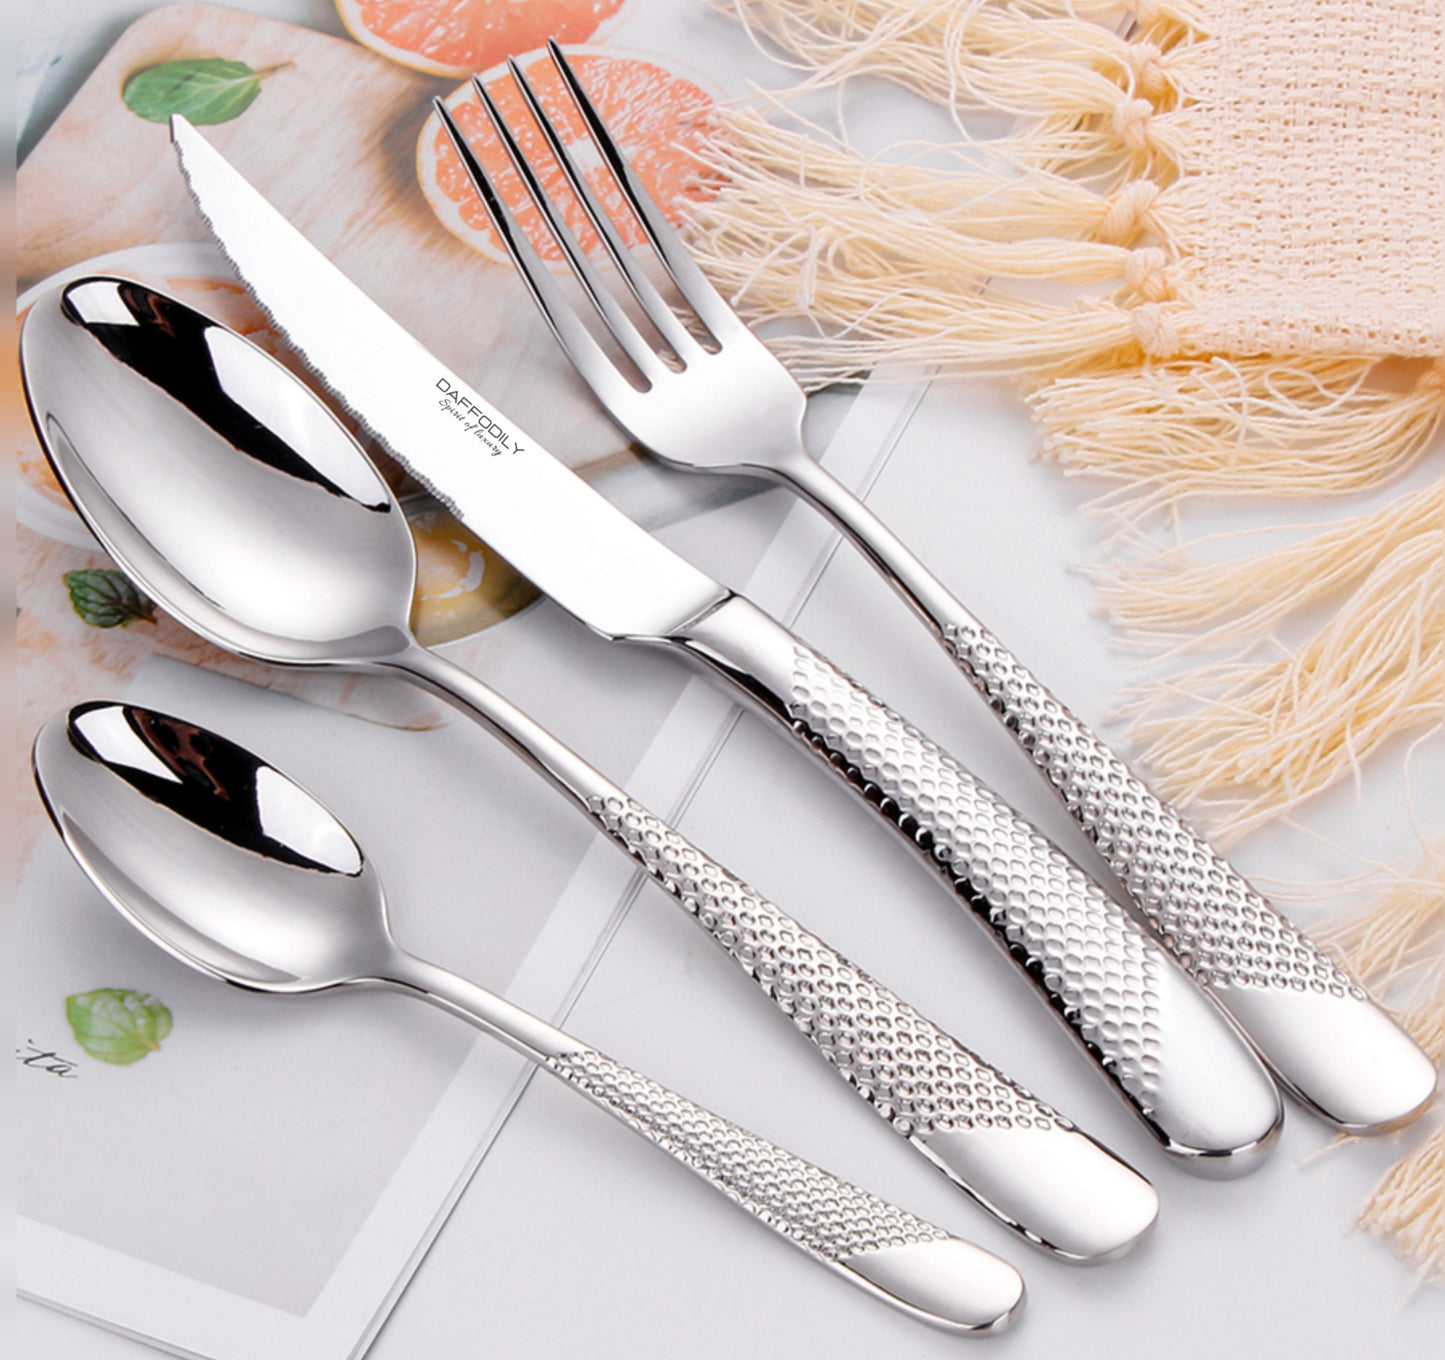 Durable, food-grade stainless steel cutlery that lasts a lifetime